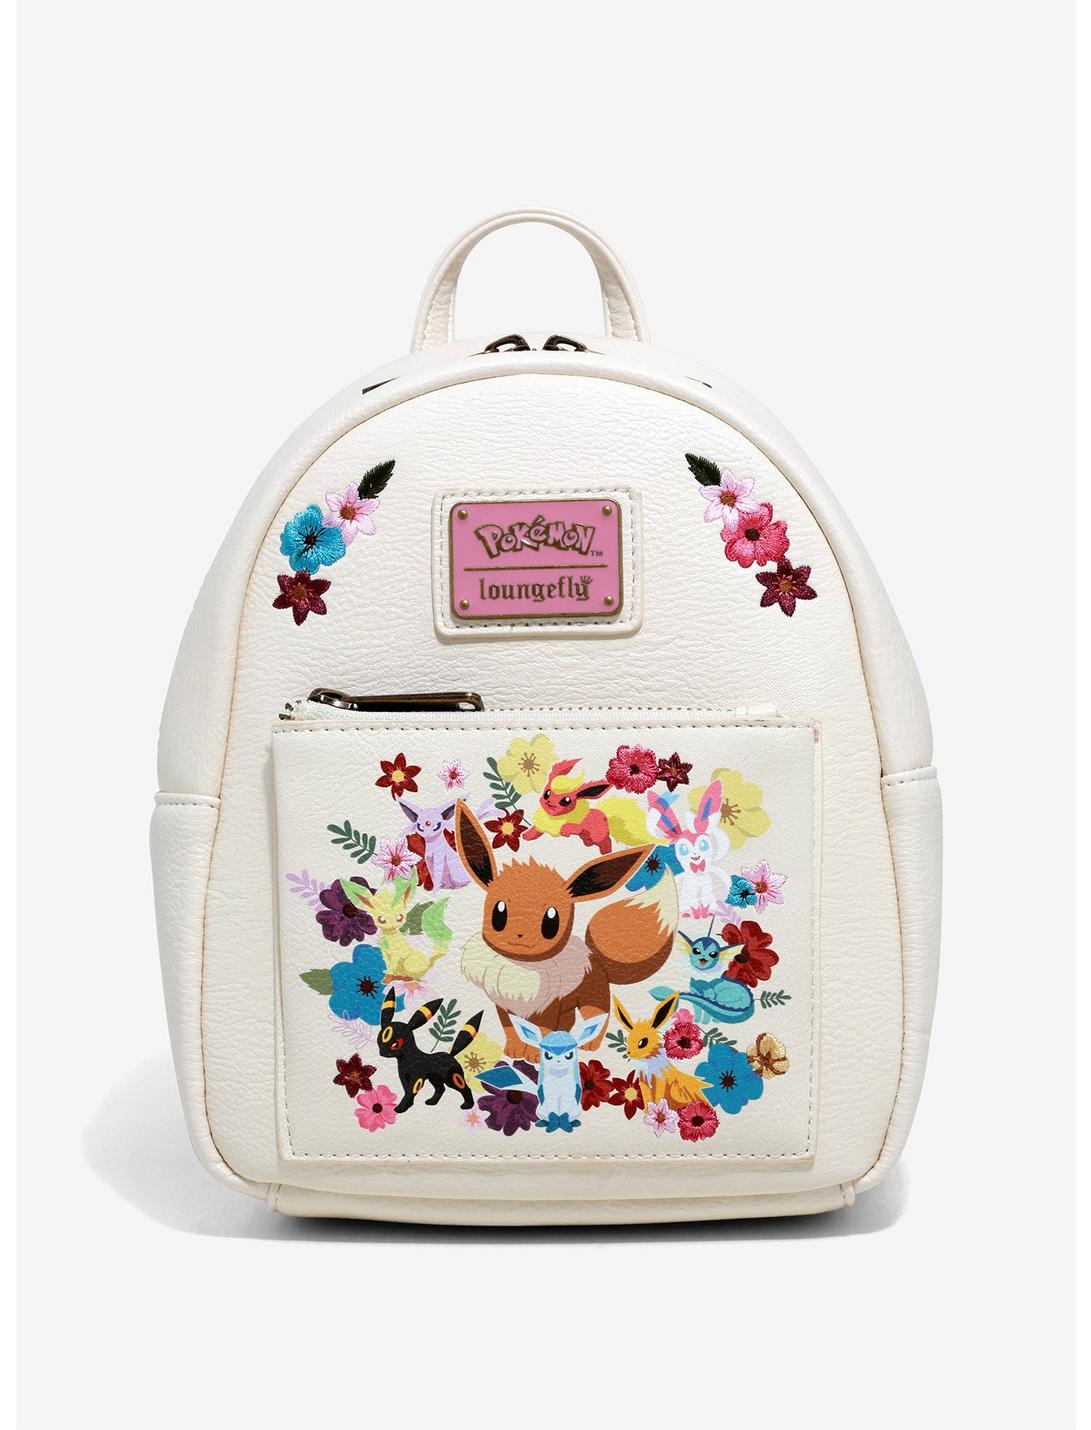 Loungefly Pokemon Eeveelutions Floral Mini Backpack, , hi-res